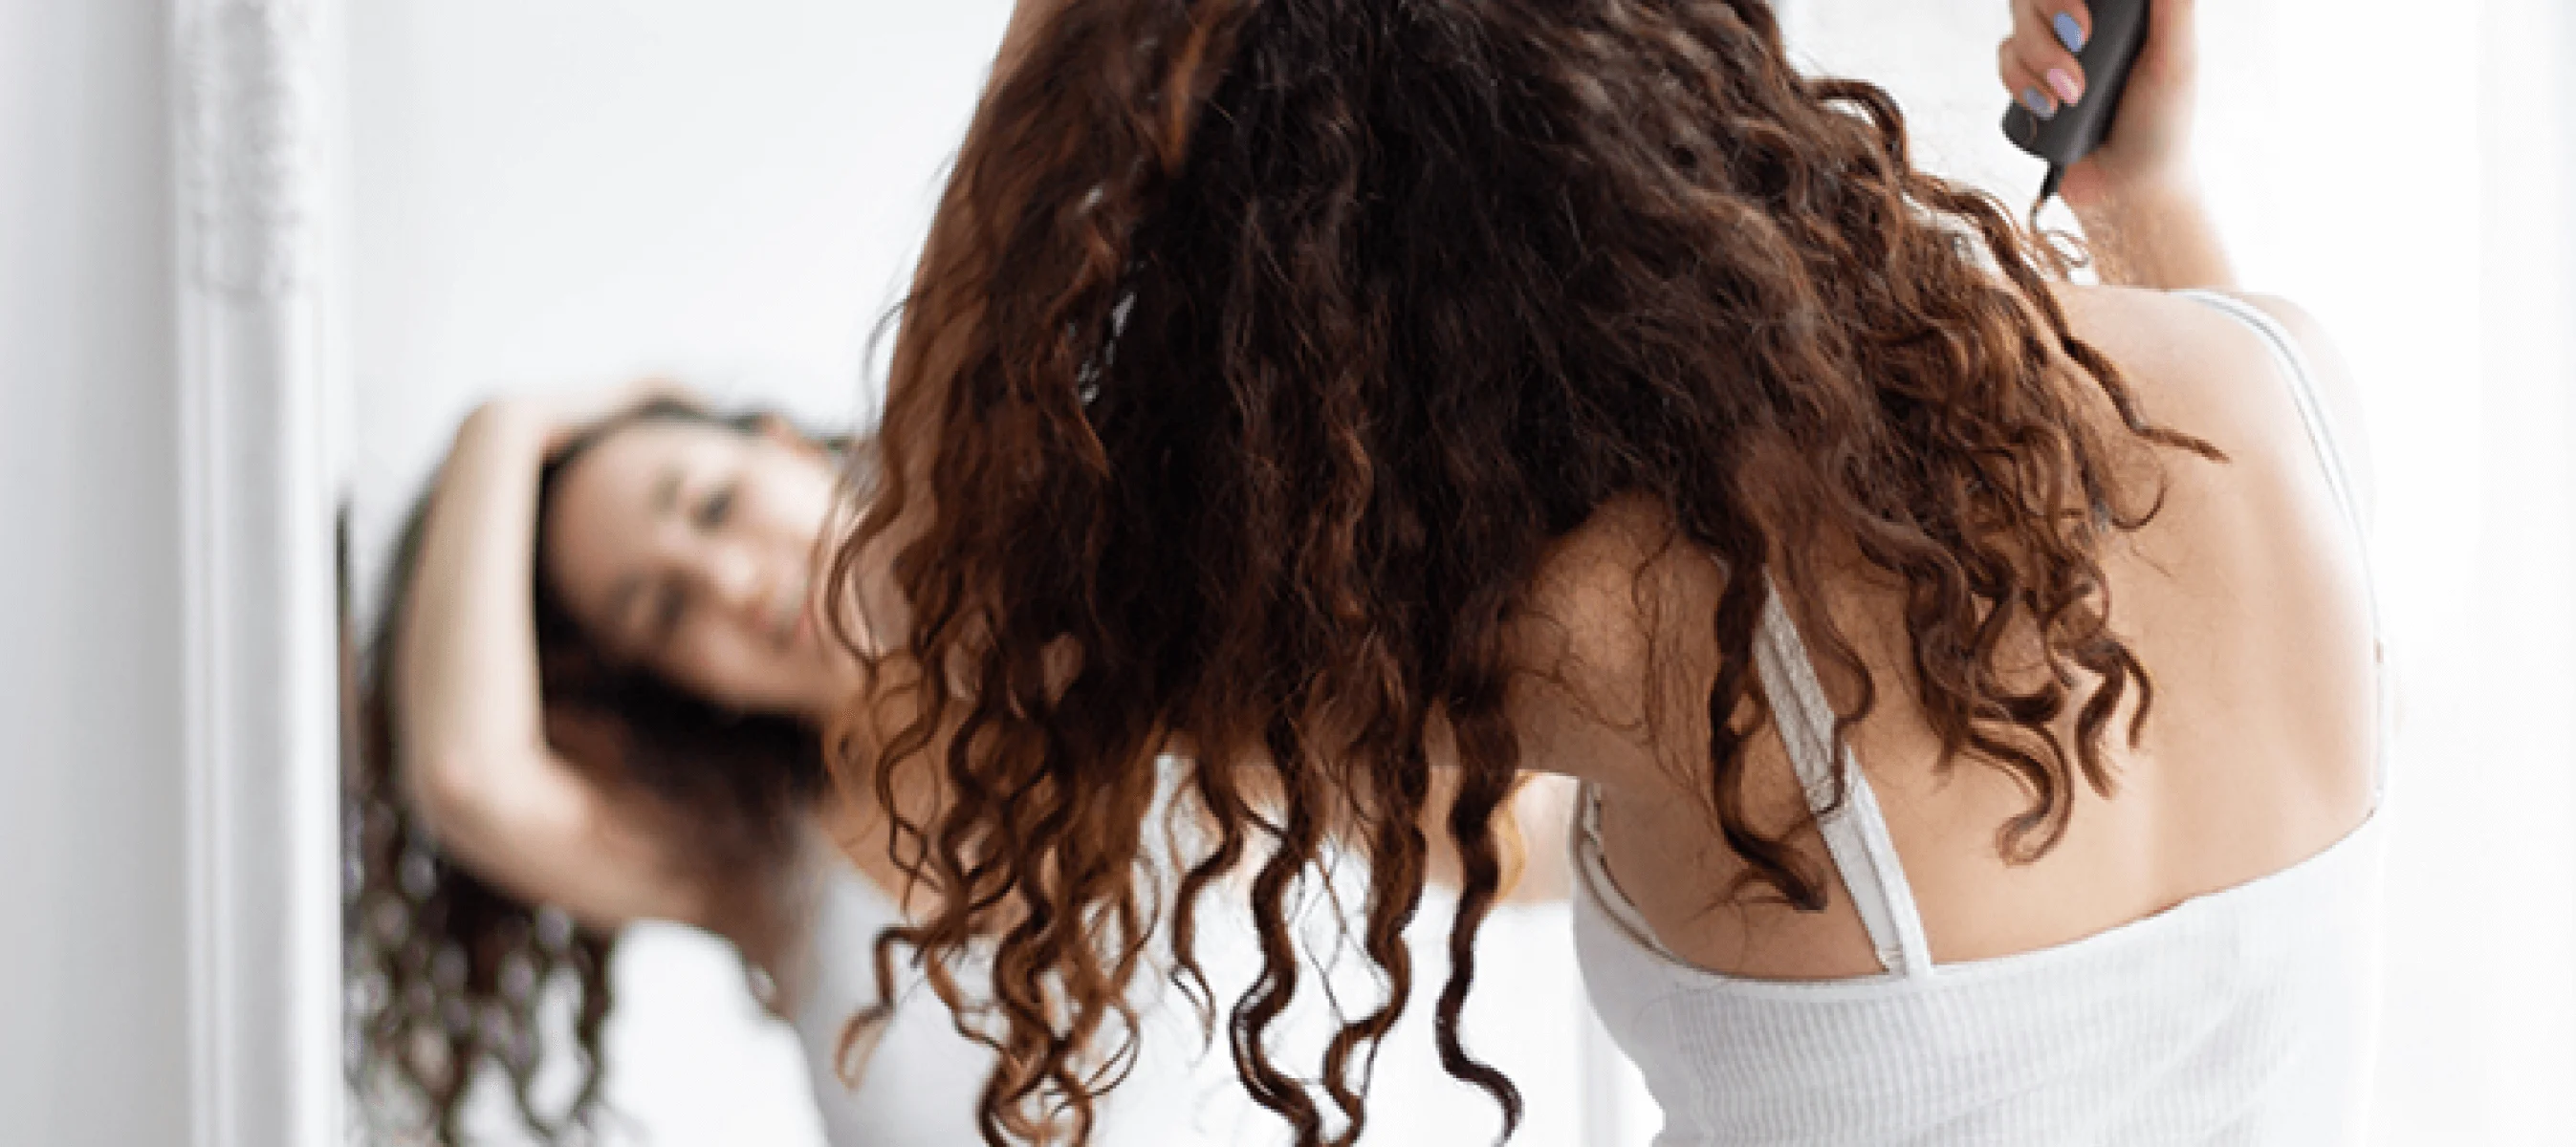 Finding the Best Hair Care Routine Based on Your Hair Type and Lifestyle